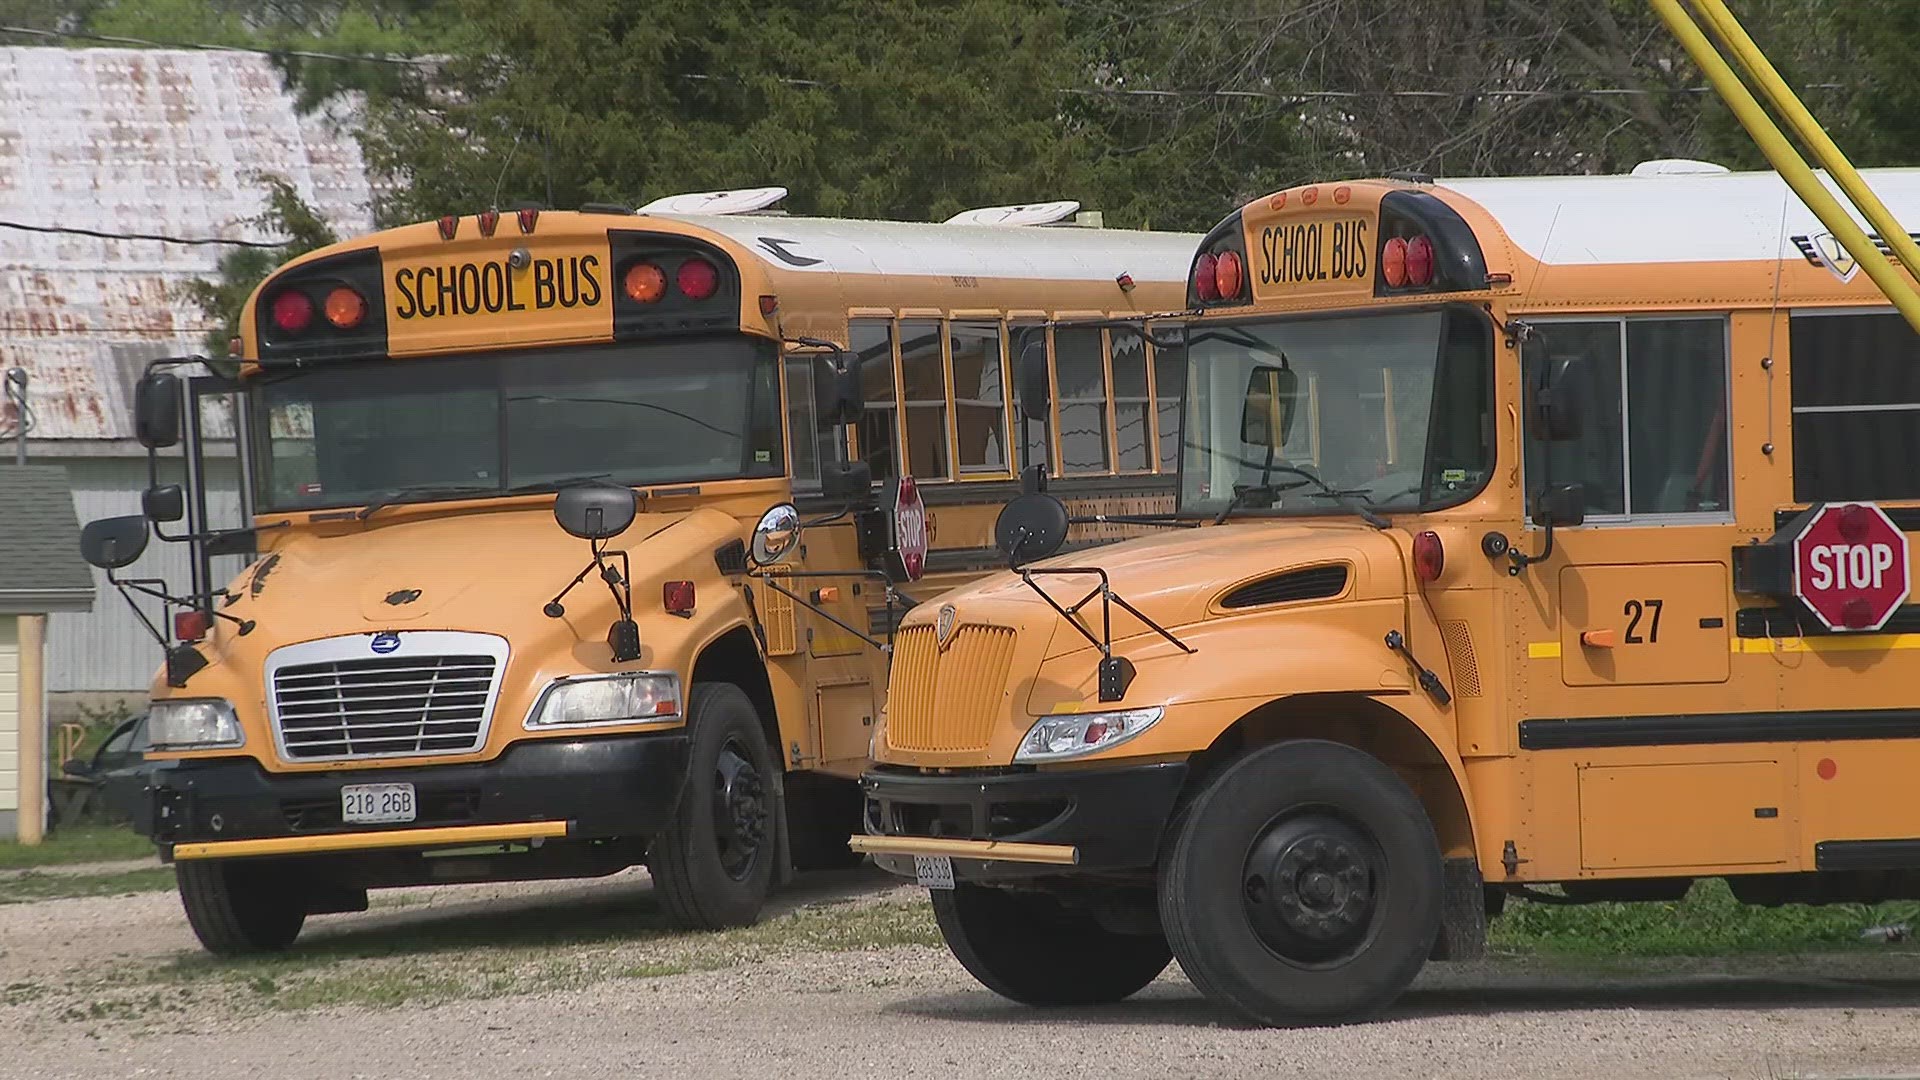 James Philpot was a convicted sex offender. The Crawford County R-1 School District hired him to drive a school bus in 2021 anyway.